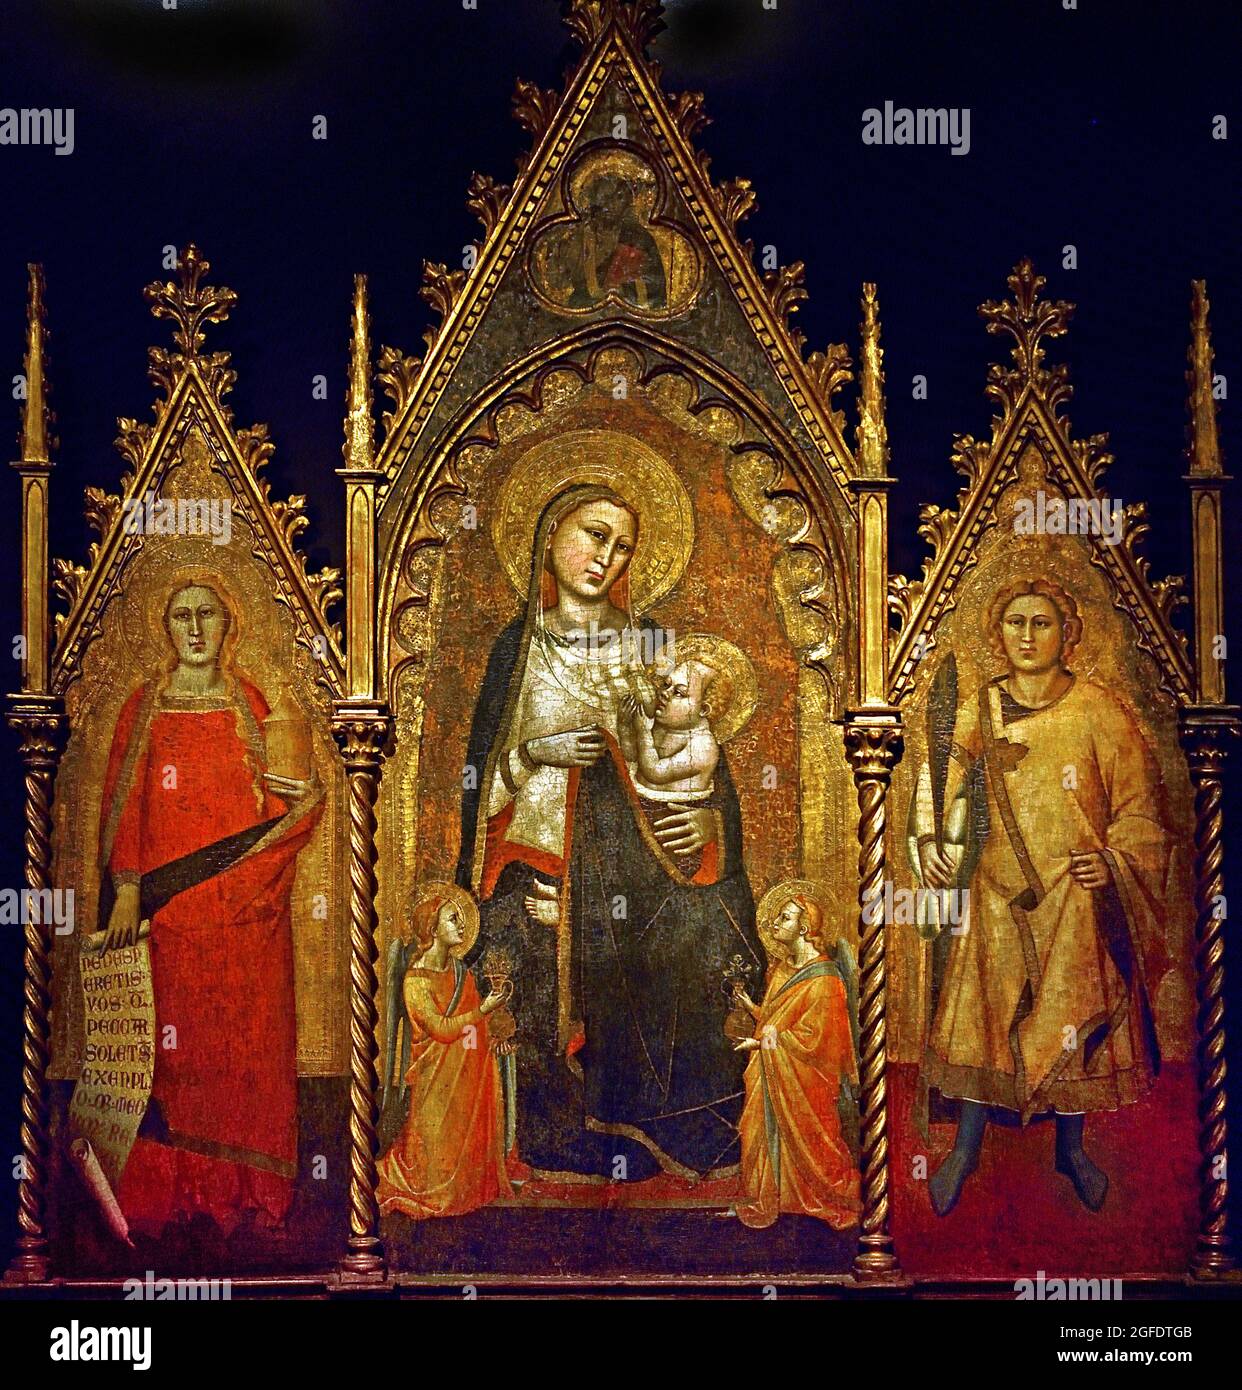 Triptych with the Virgin and Child, and Saints Mary Magdalene and Ansanus, Orcagna Andrea di Cione, 1350, Italy, Italian, tempera on panel, 146cm × 119.5cm,  Orcagna  mid-14th century. This altarpiece, which has survived almost intact, The depiction of the figures of the Virgin and Child and two saints reflects the rather stiff, hieratical style of the period. Stock Photo